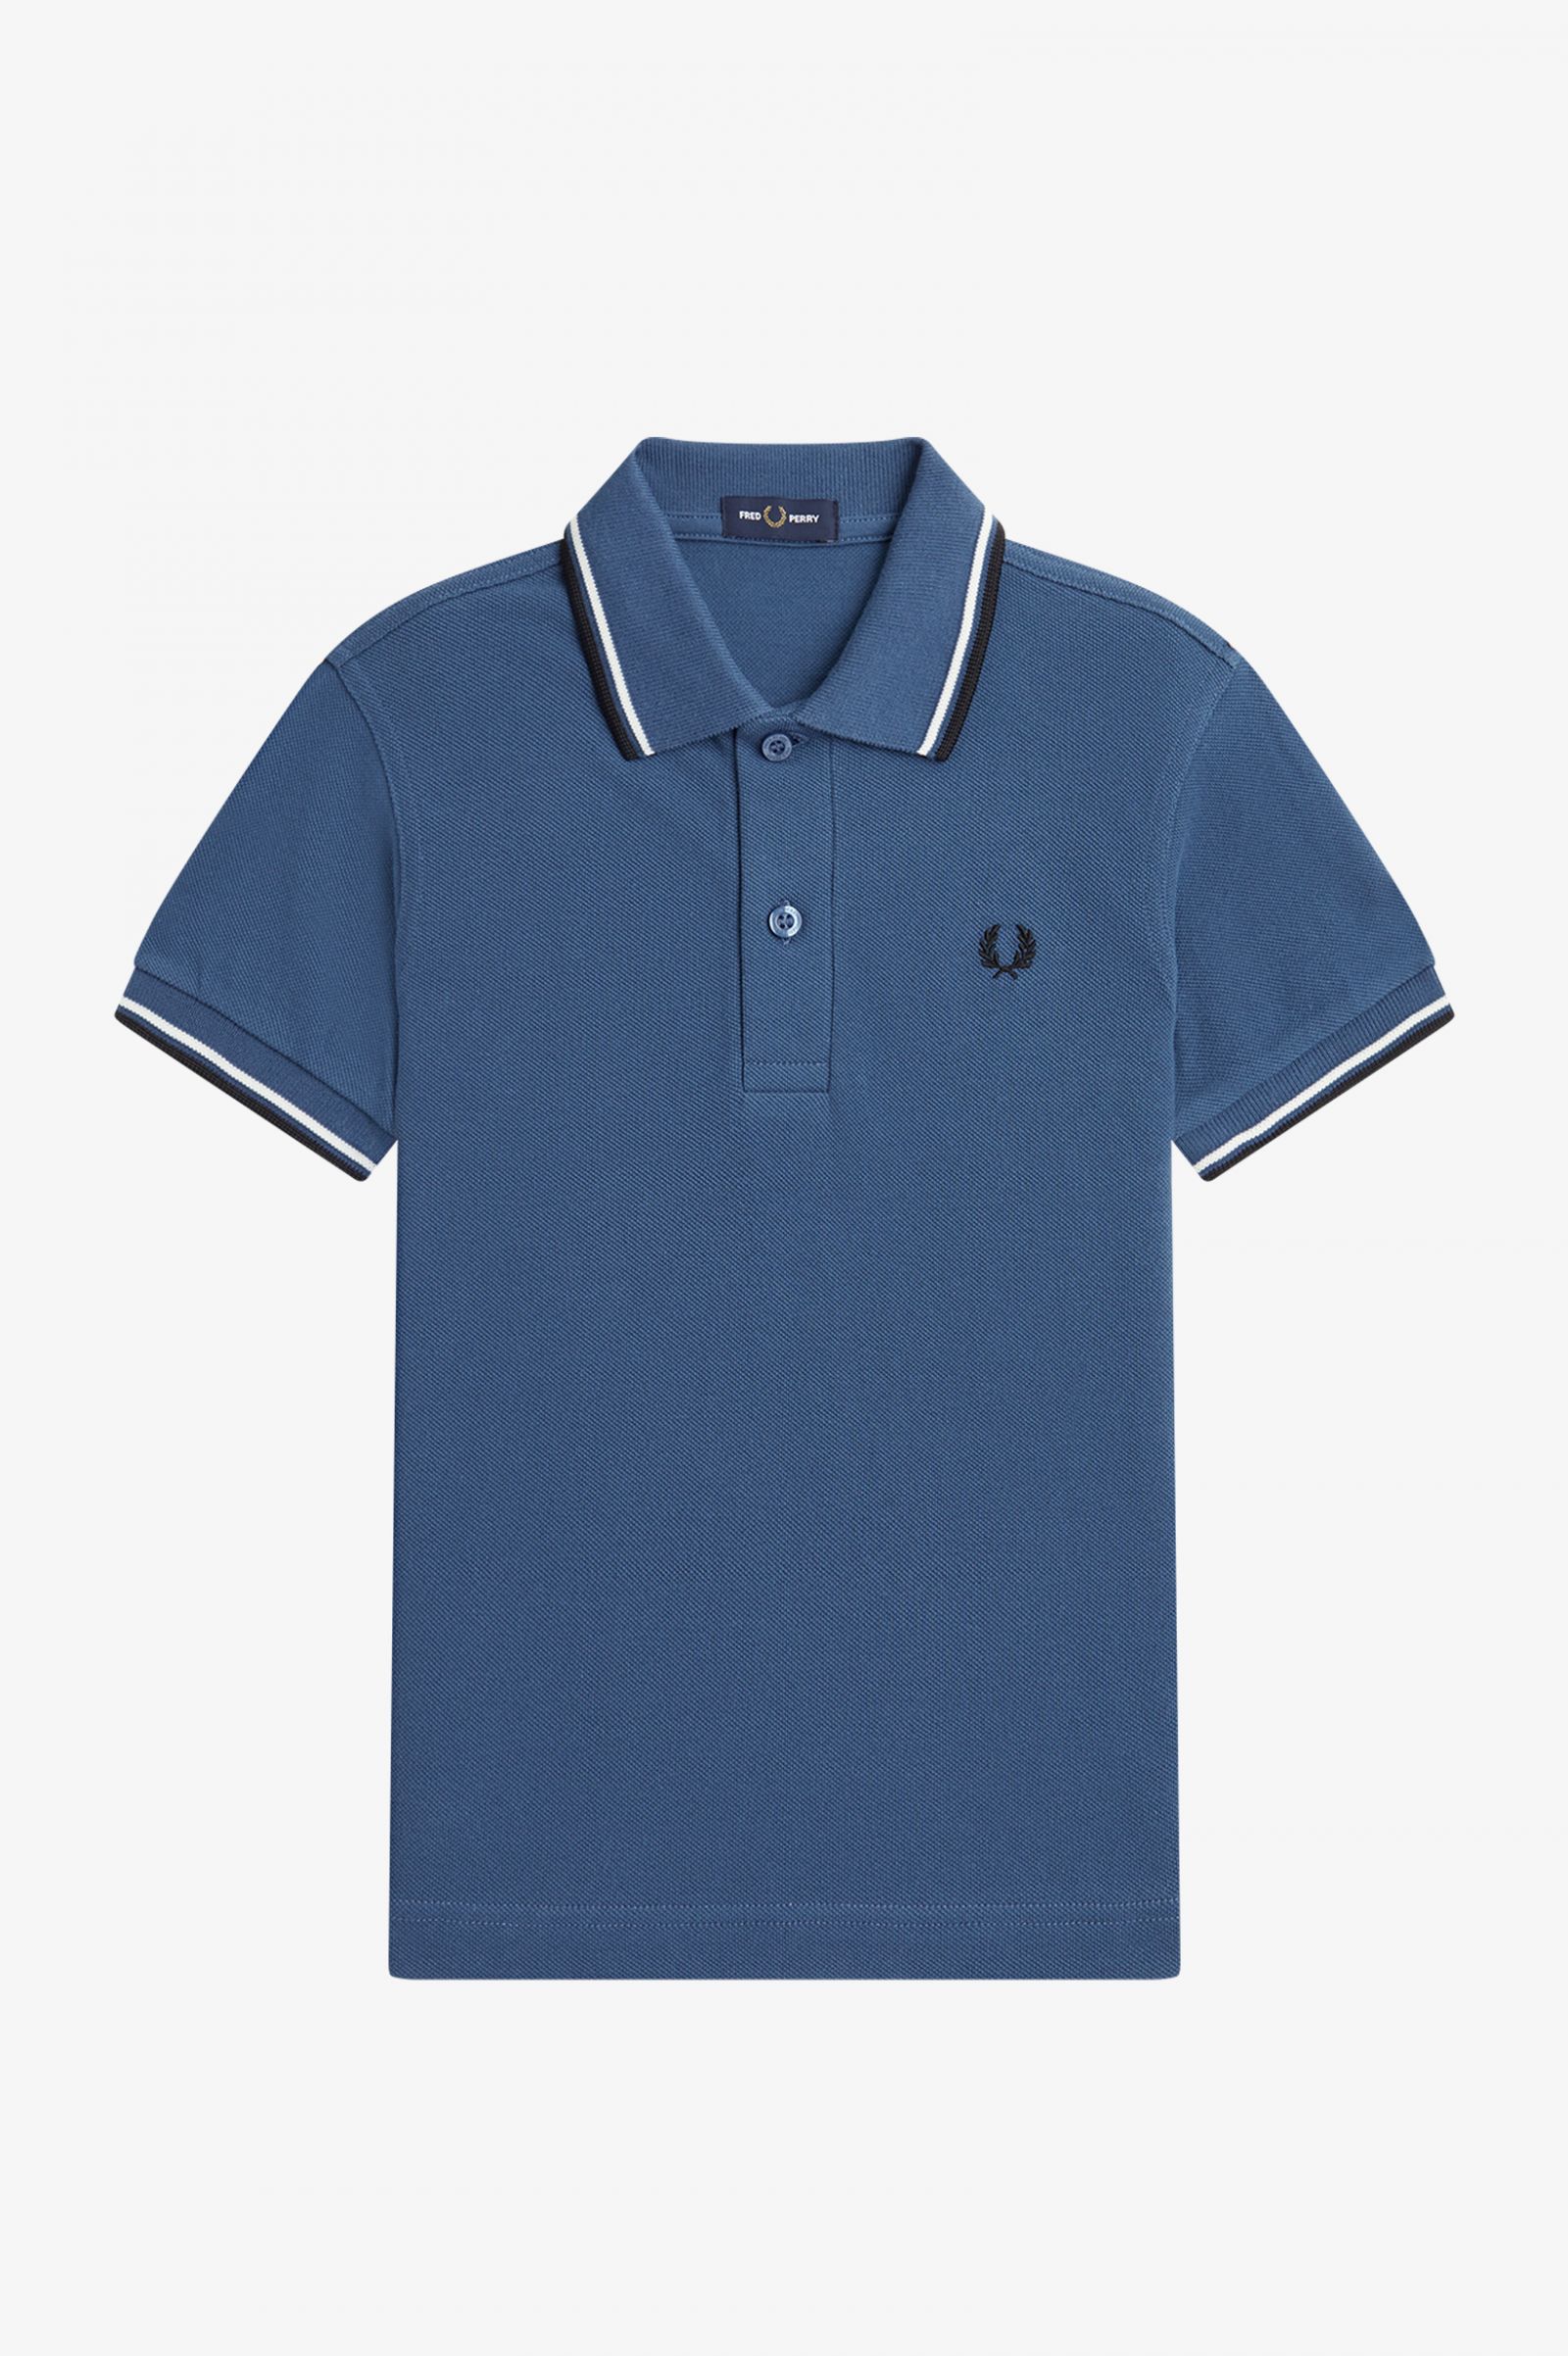 Kids Twin Tipped Fred Perry Shirt - Midnight Blue / Snow White / Black ...